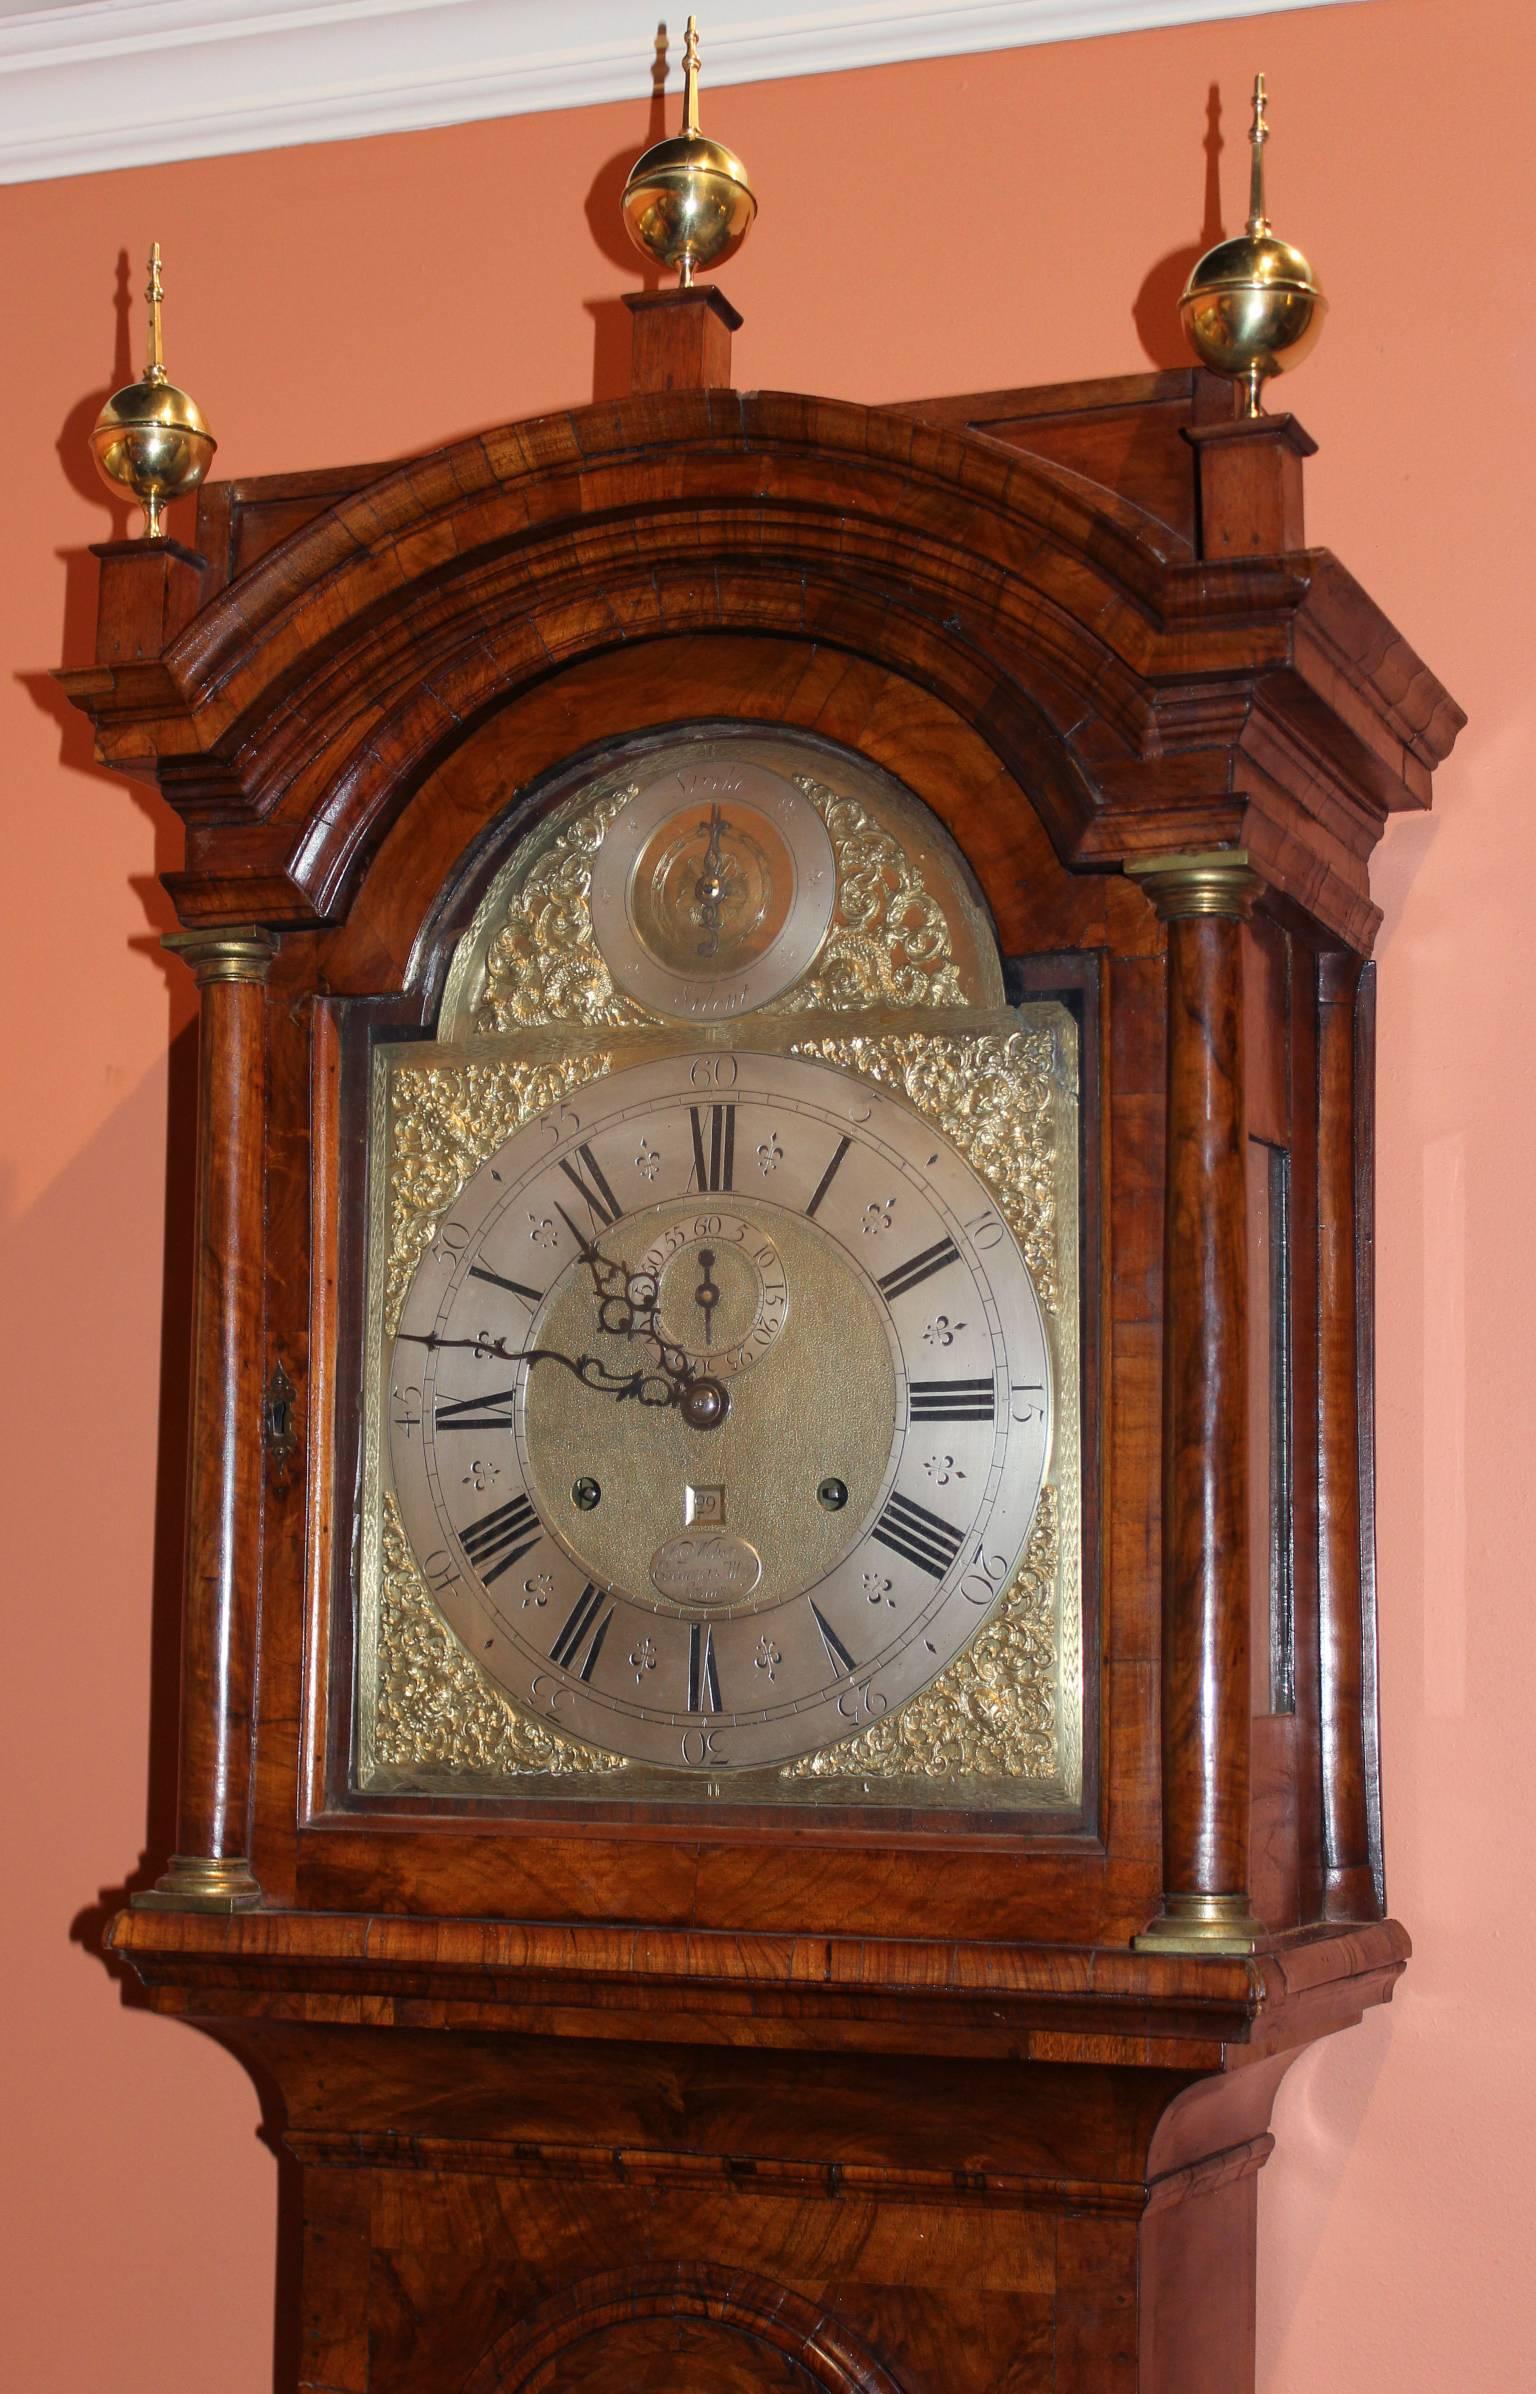 An exceptional and rare English burled walnut veneered and inlaid tall case clock by William Webster with 30 day brass movement. The silvered dial engraved “Wm Webster, Exchange Alley, London”.

The tall clock is in excellent working condition and